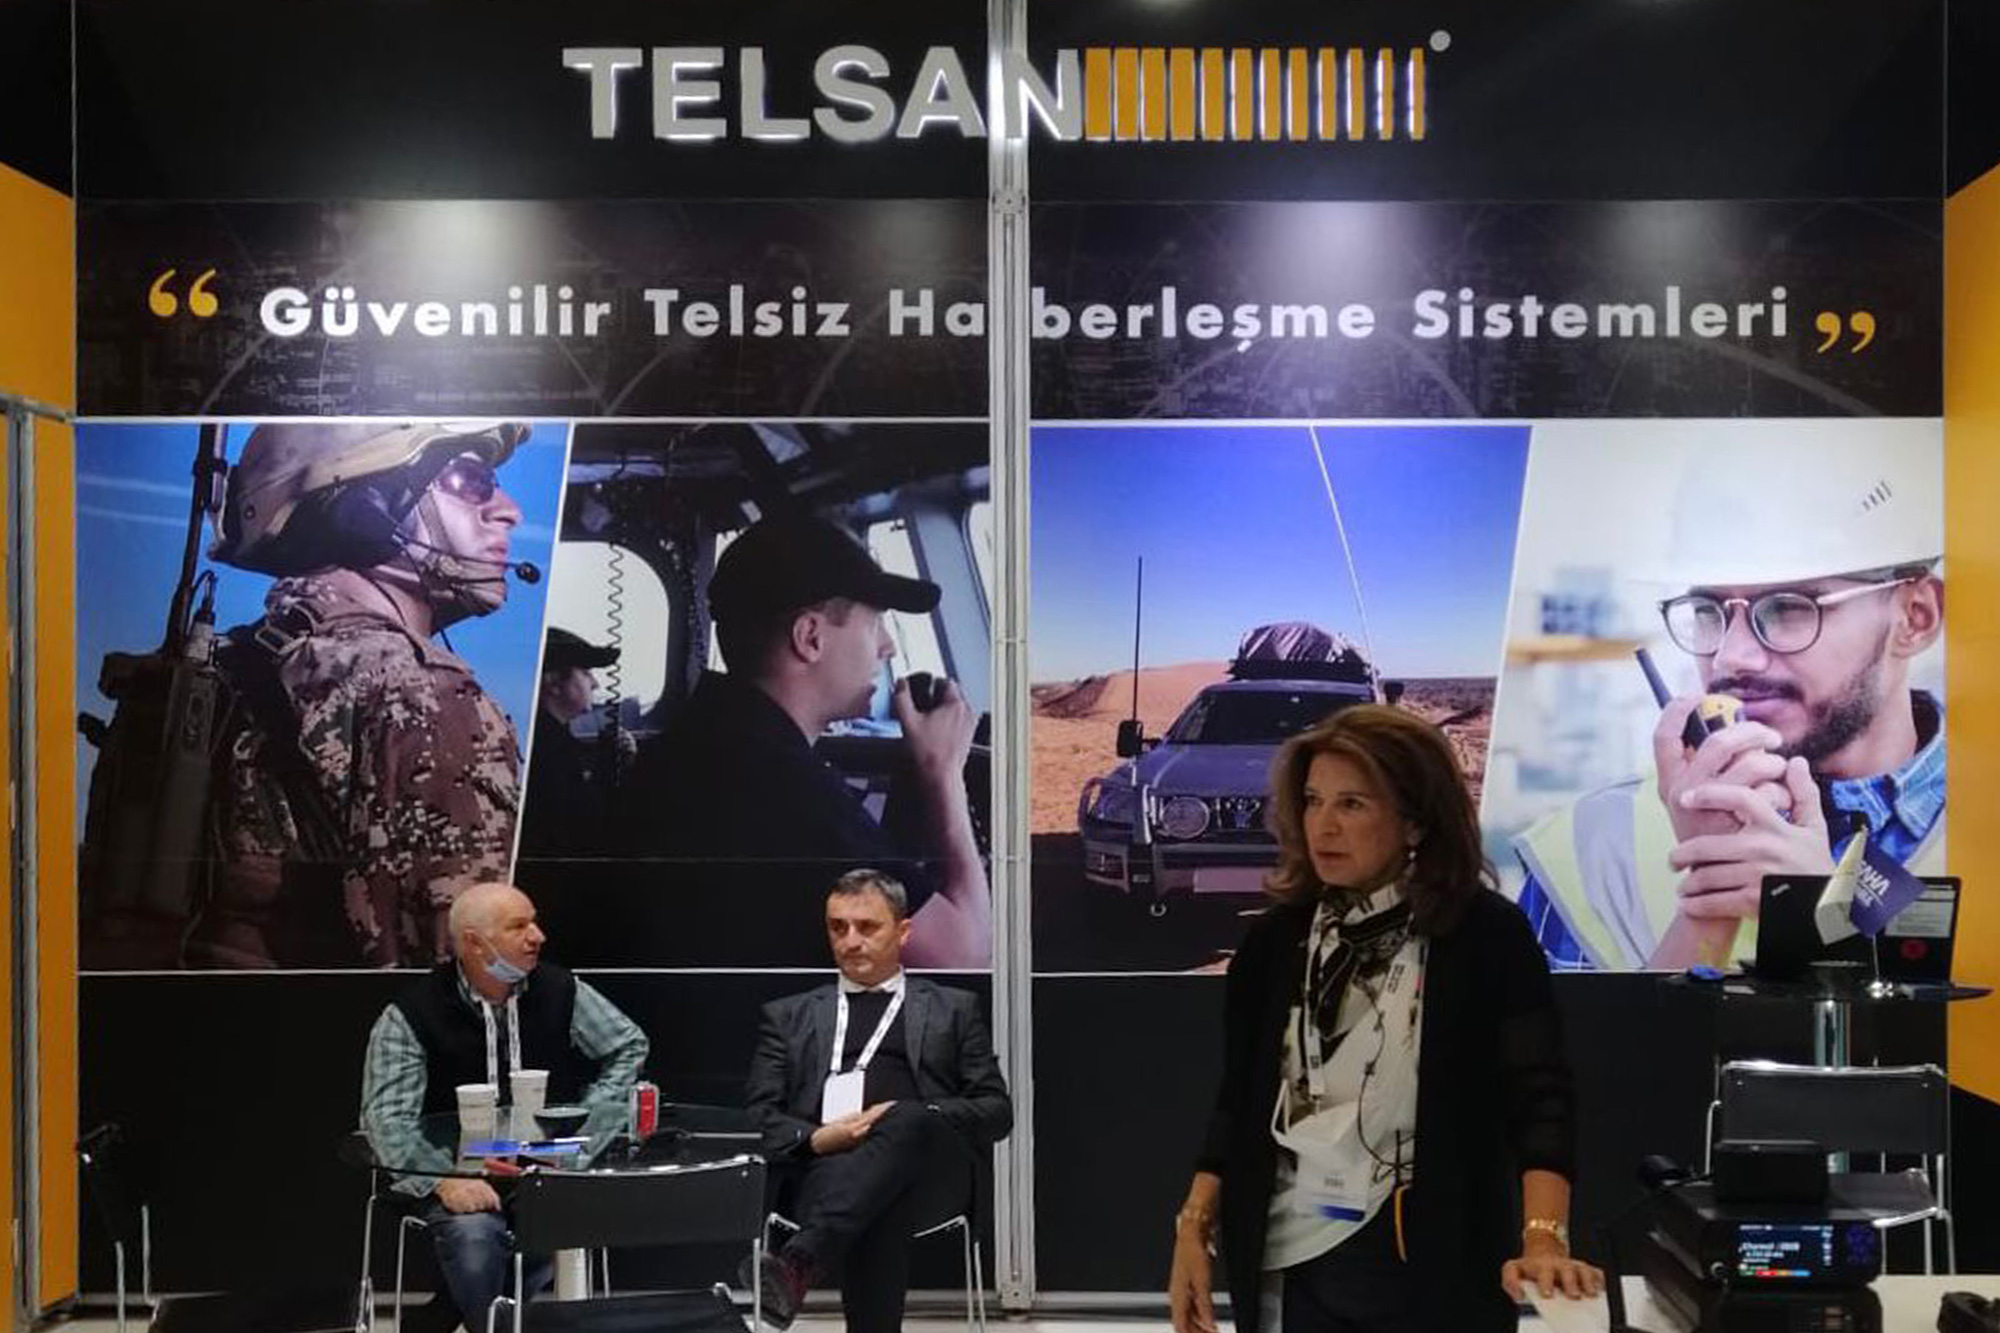 Telsan Expo Stand